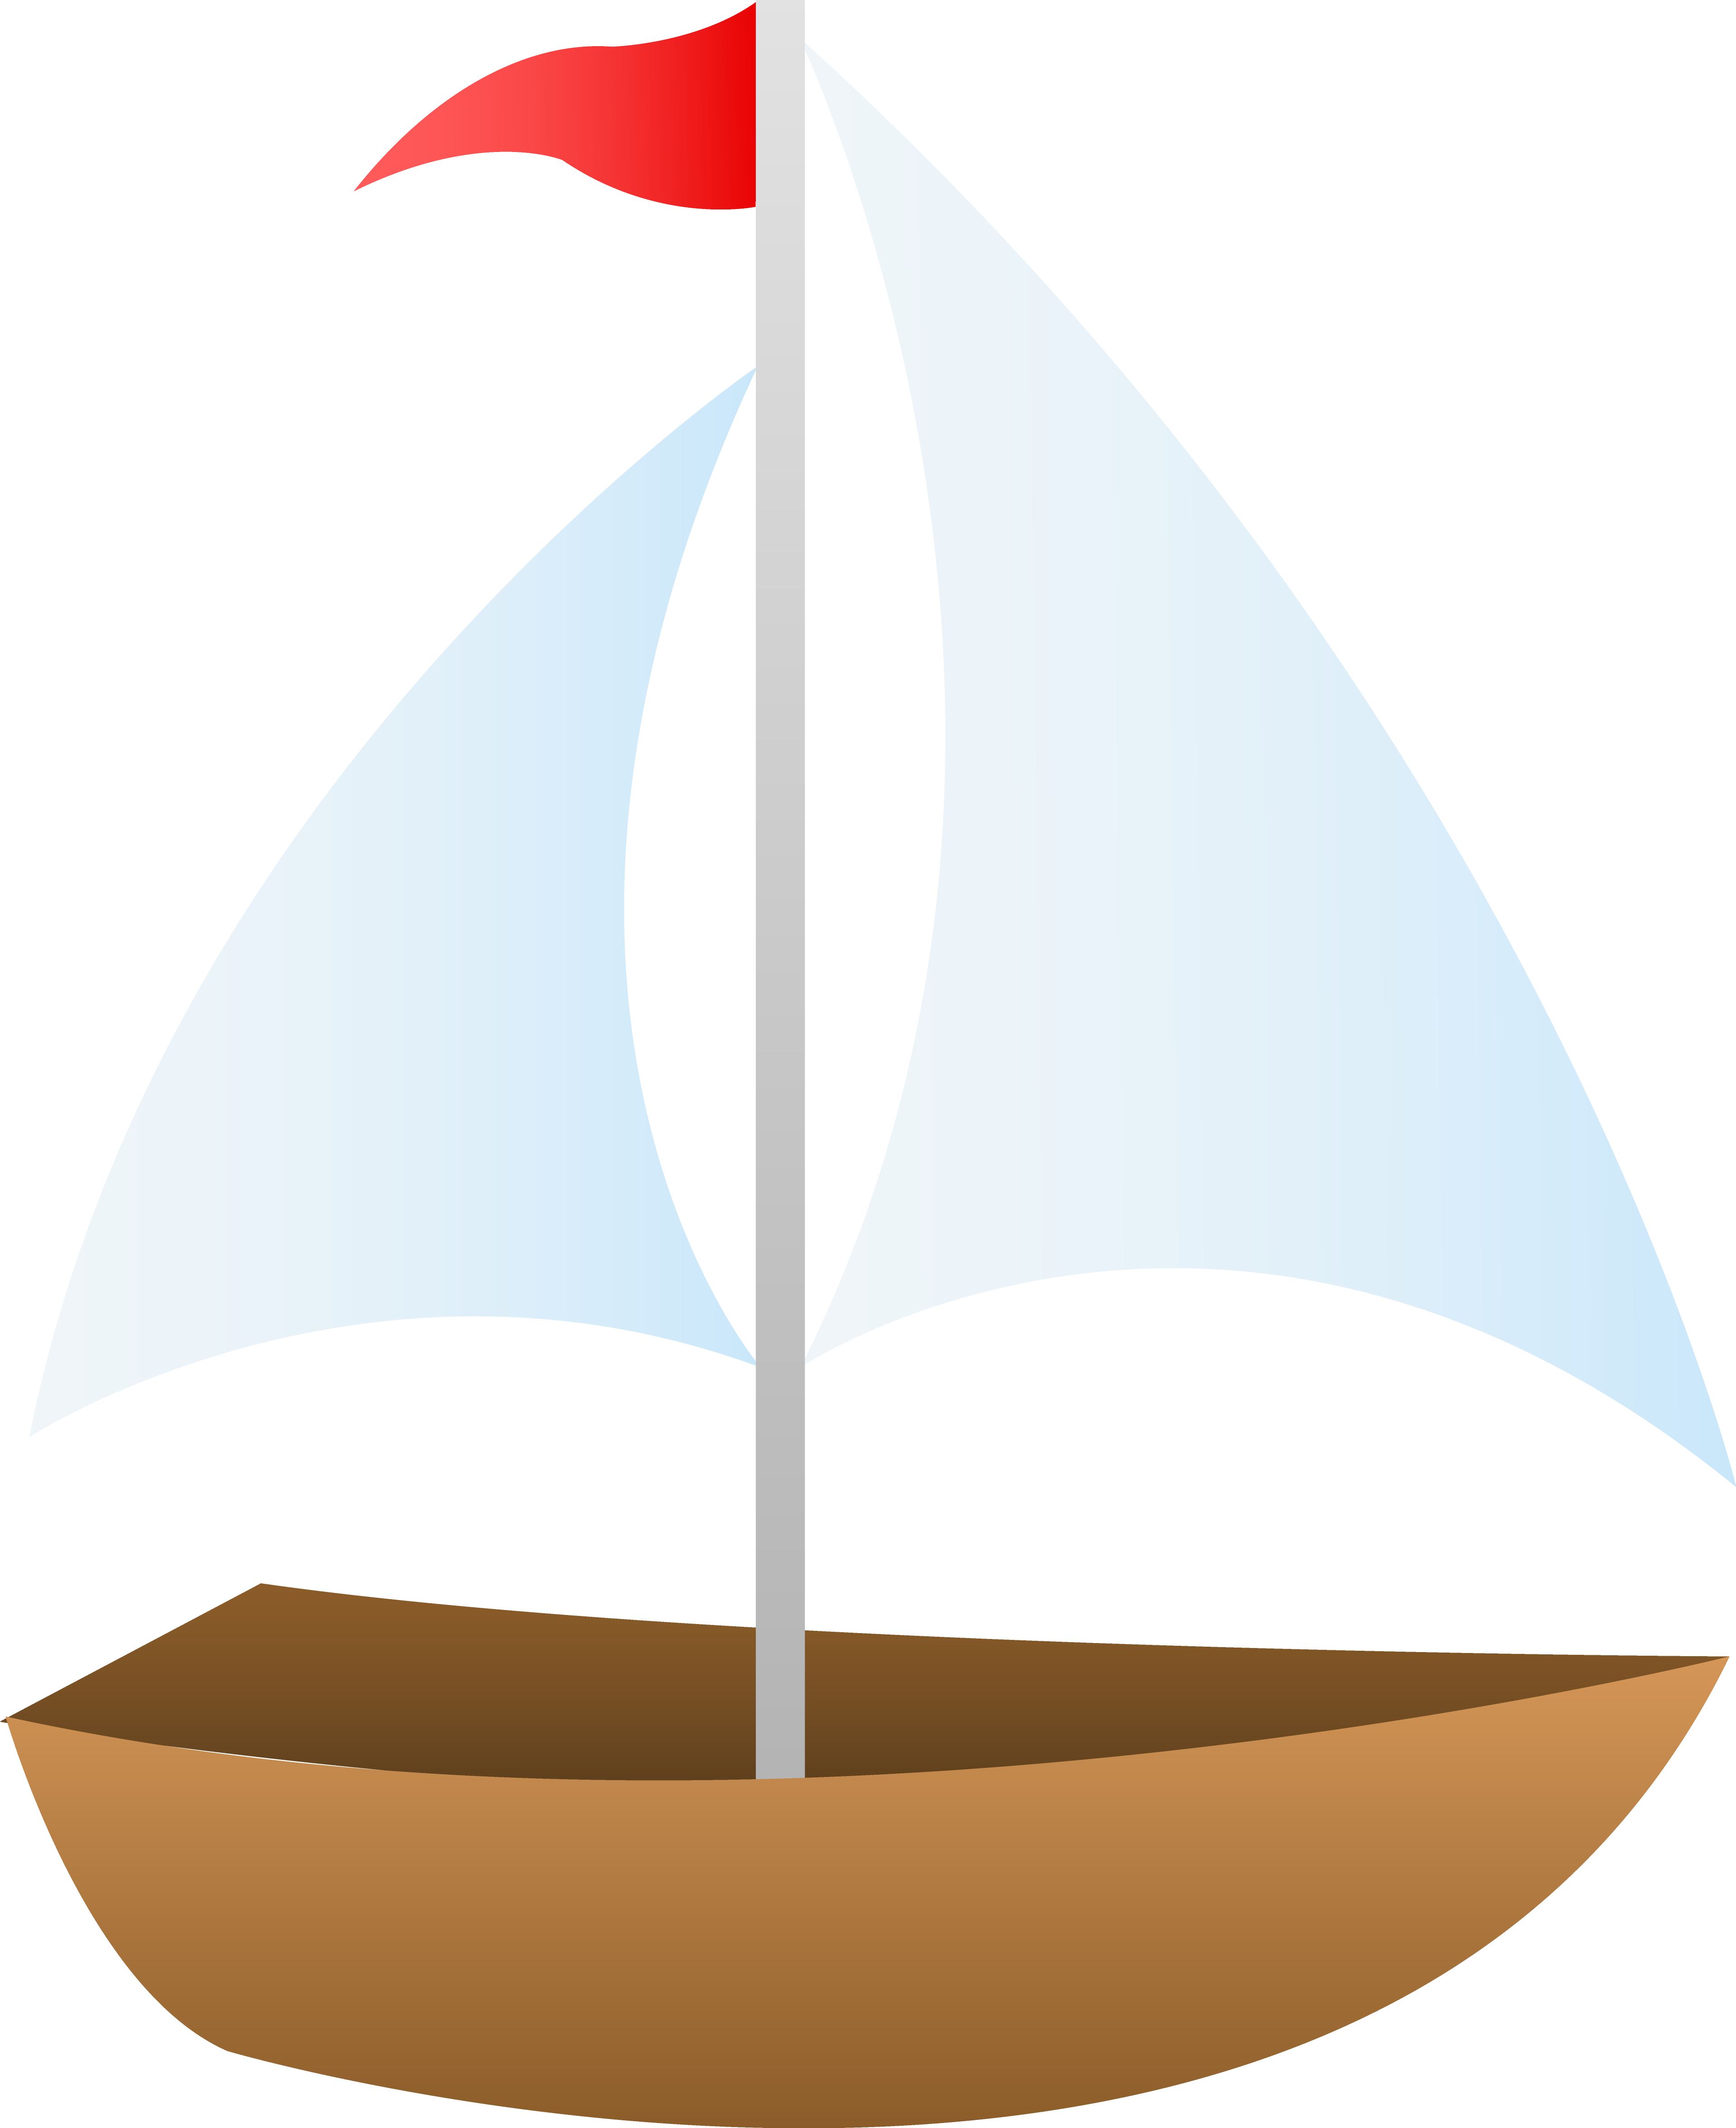 Free Cartoon Boat Png, Download Free Cartoon Boat Png png images, Free